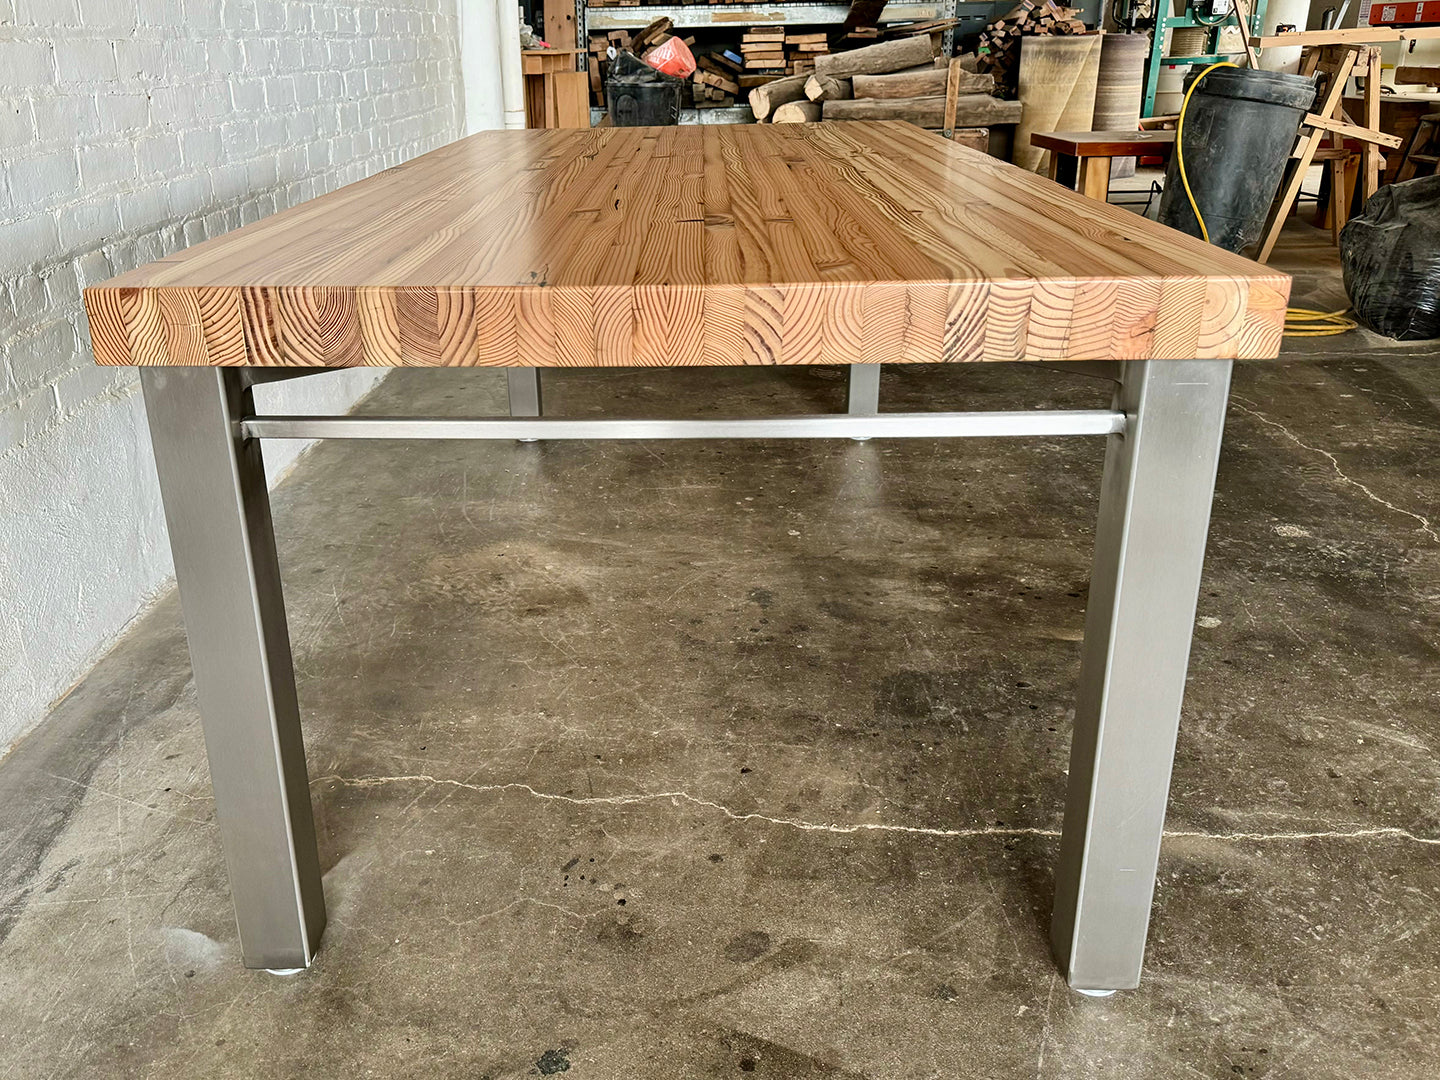 High Street Dining Table - Stainless Steel Base